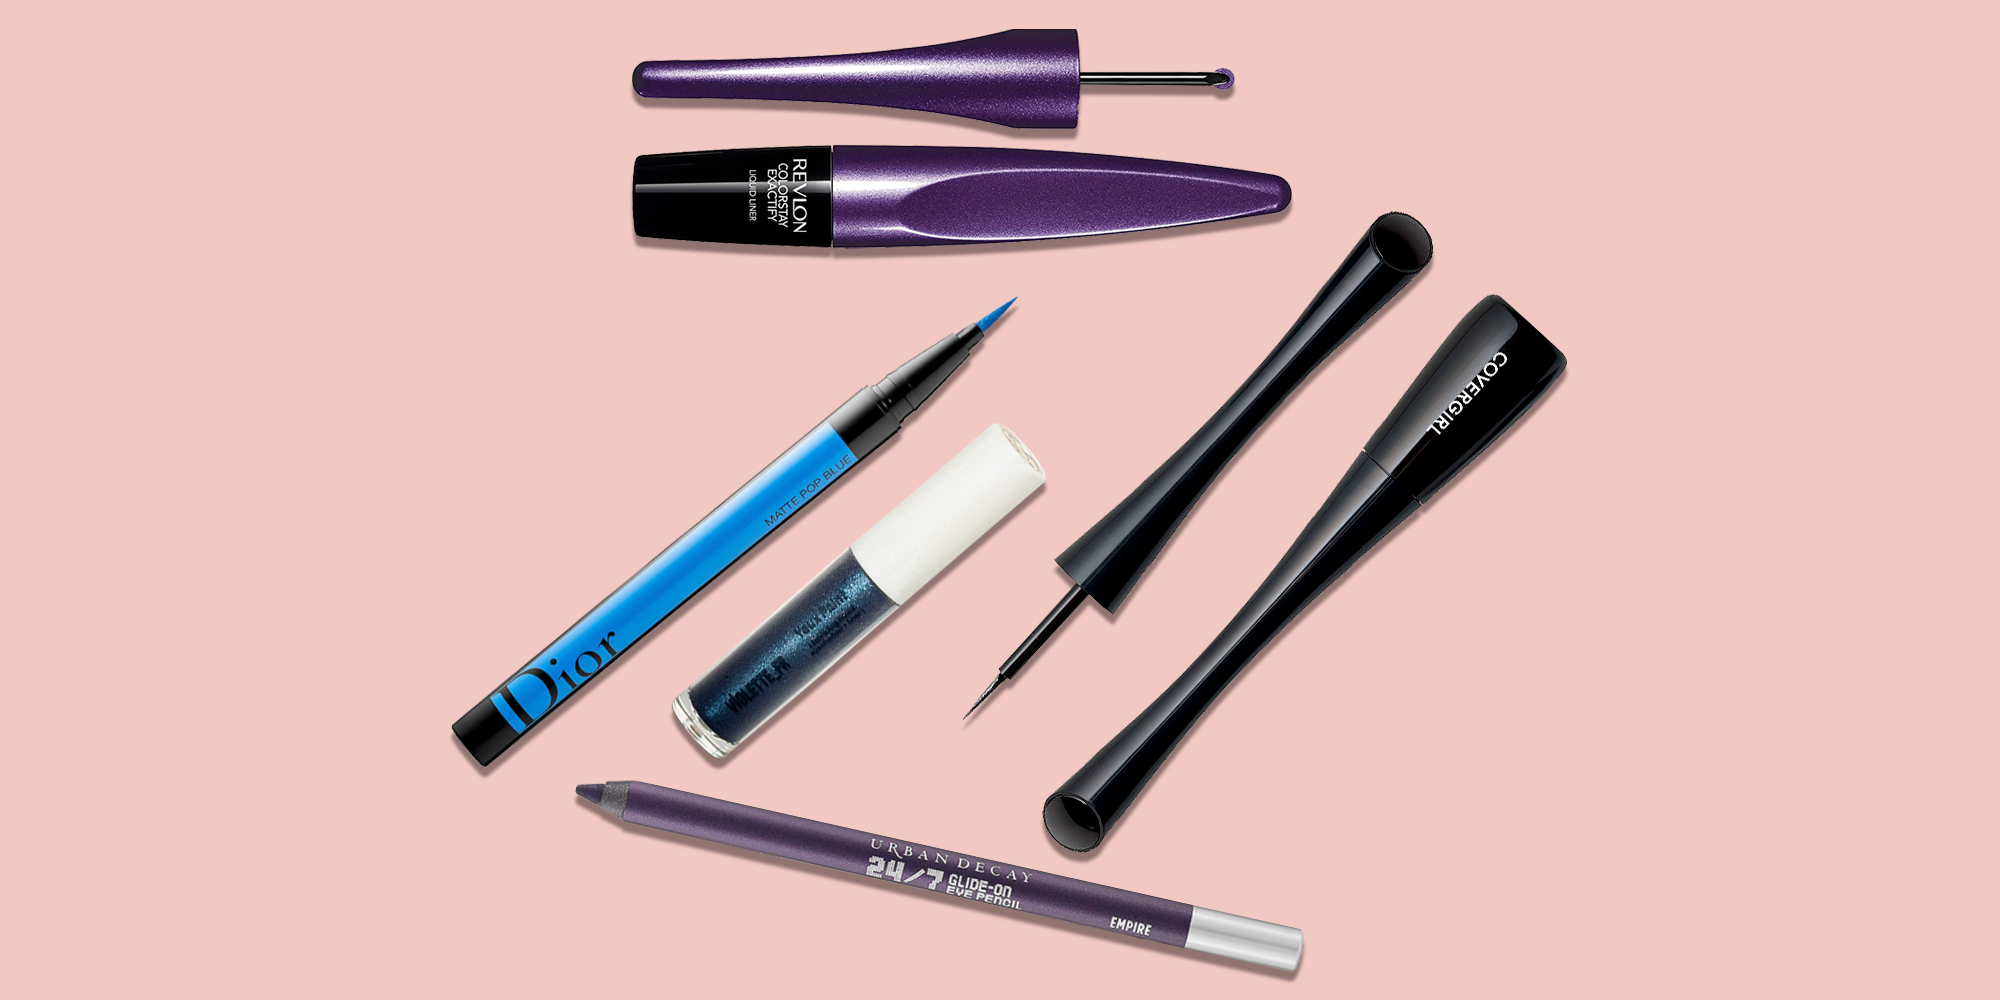 Give Diorshow Waterproof Kohl Eyeliner Crayon for Holiday